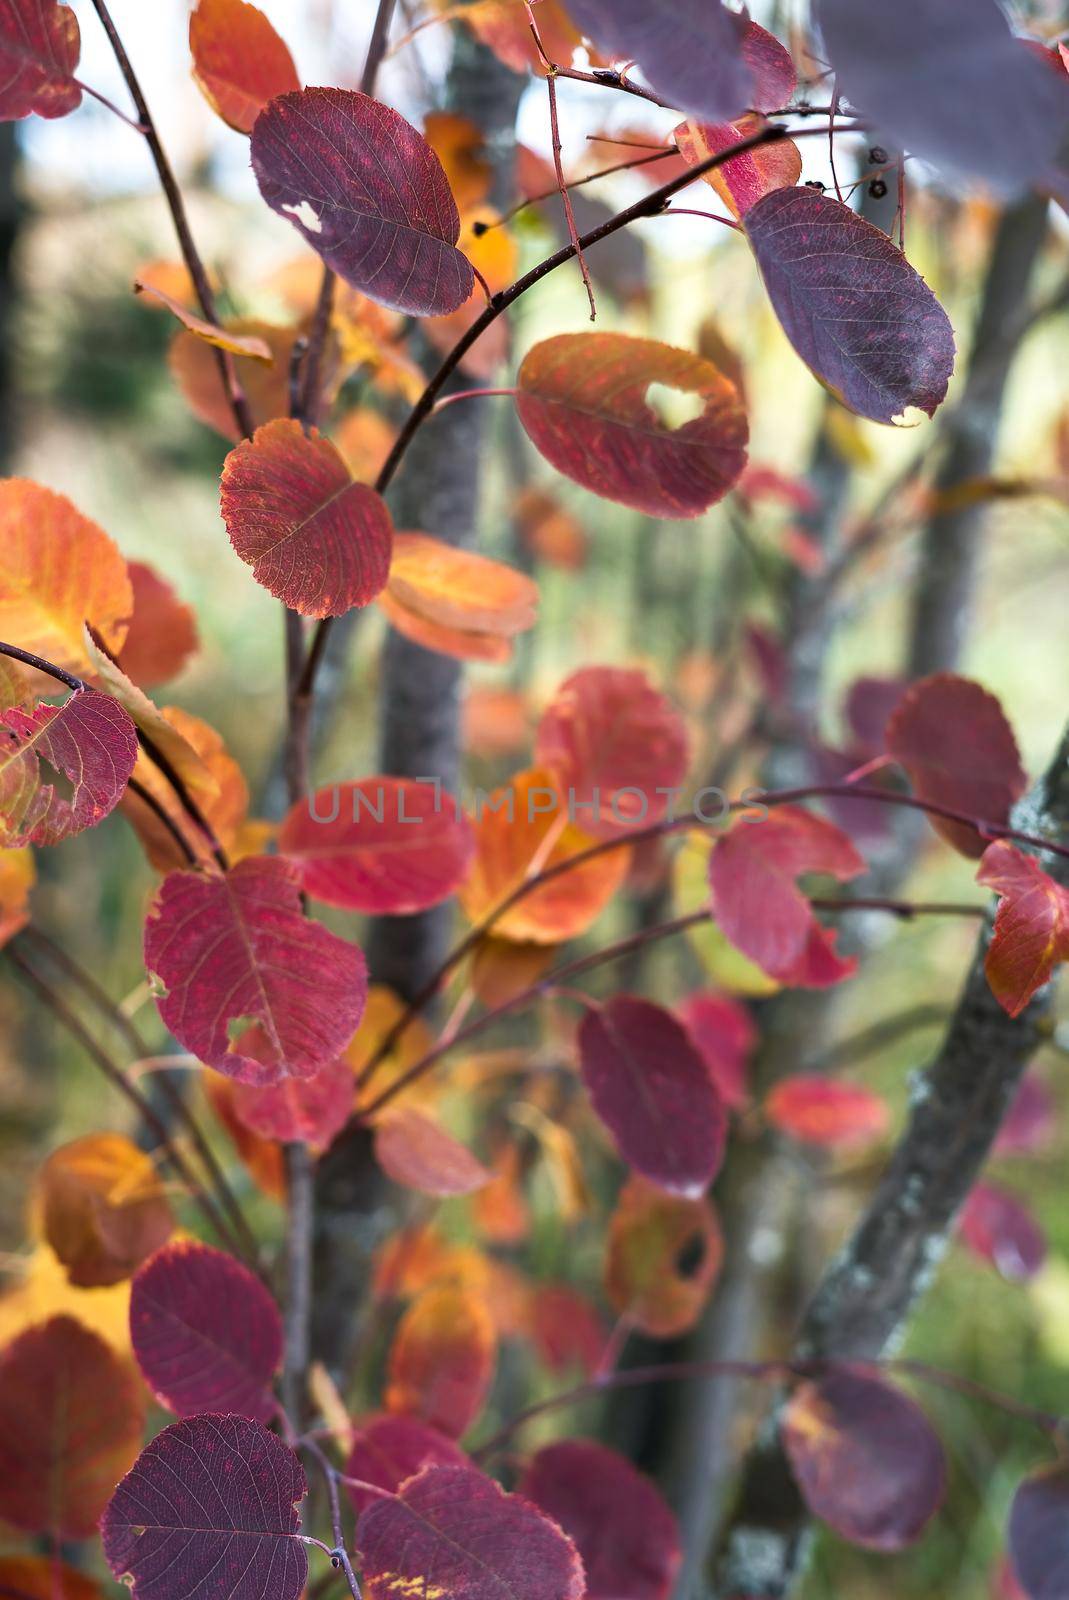 Autumnal colorful tree branch detail with many dry leaves in different natural changing warm autumn colors a fresh fall season day outdoors in the forest at the countryside.